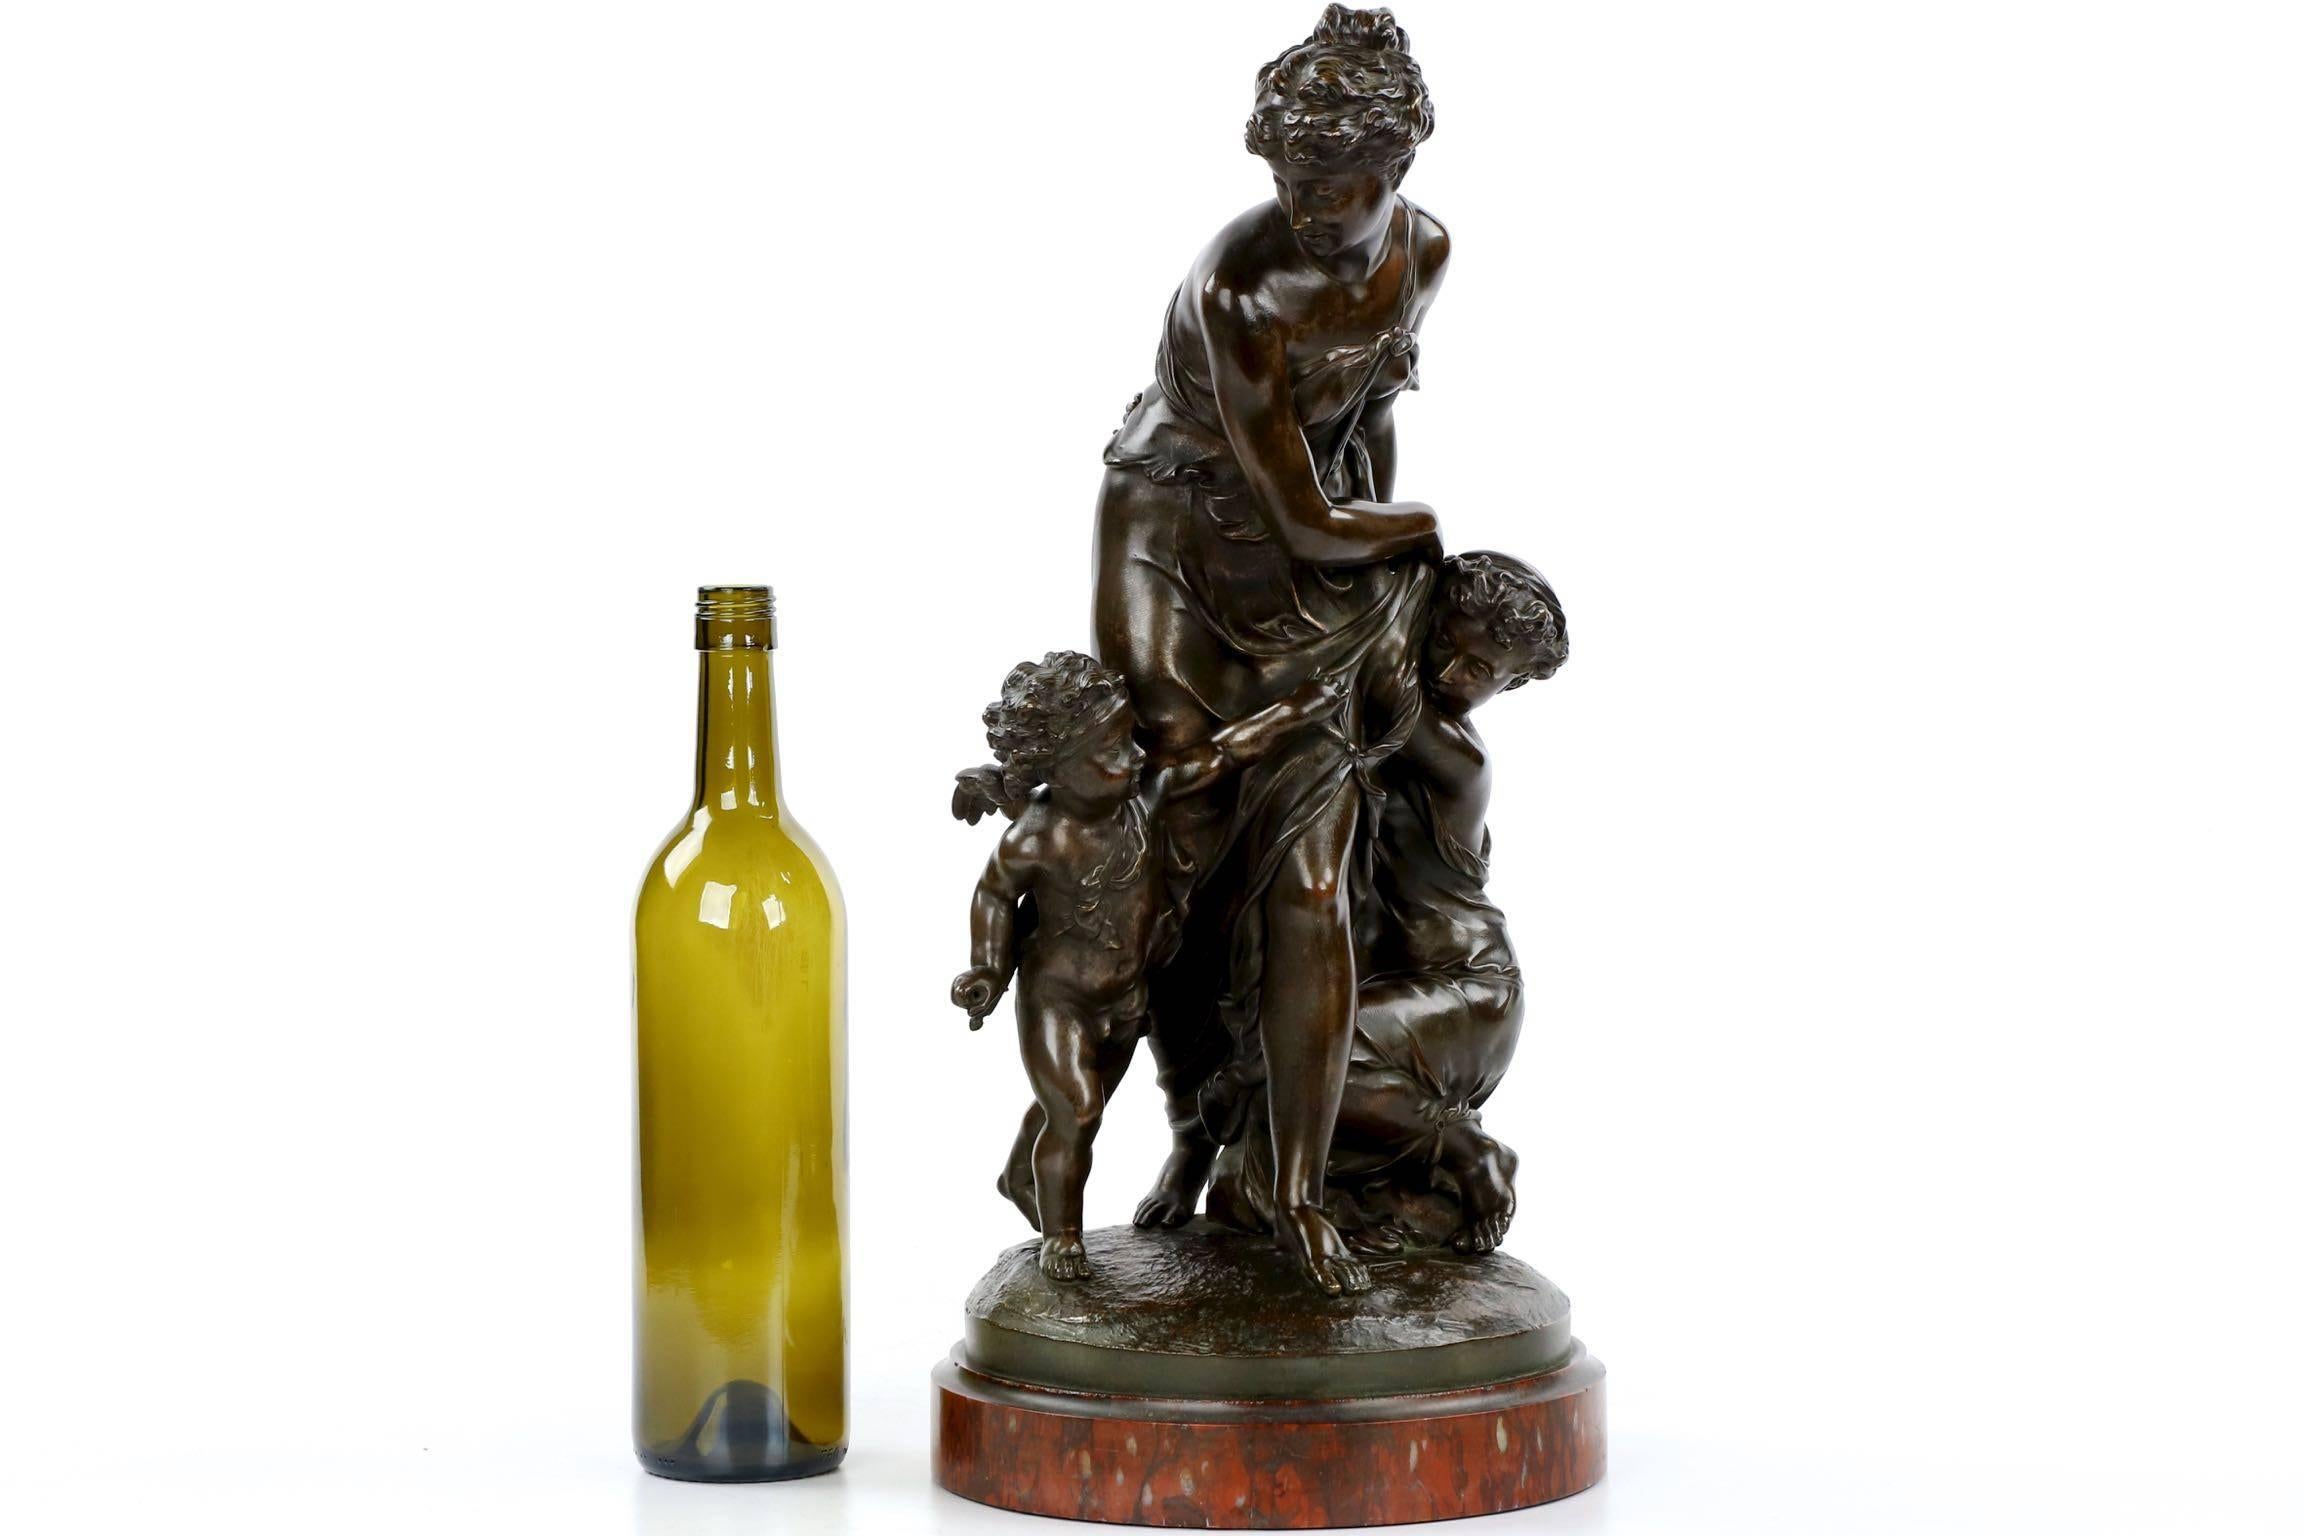 Bronze group of two females and cupid after model by Pierre Eugene Emile Hebert (French, 1828-1893).
"Le Jeu de Cache-Cache", signed in base "E. Hebert," stamped on base edge "Tiffany & Co."
  

A moving and